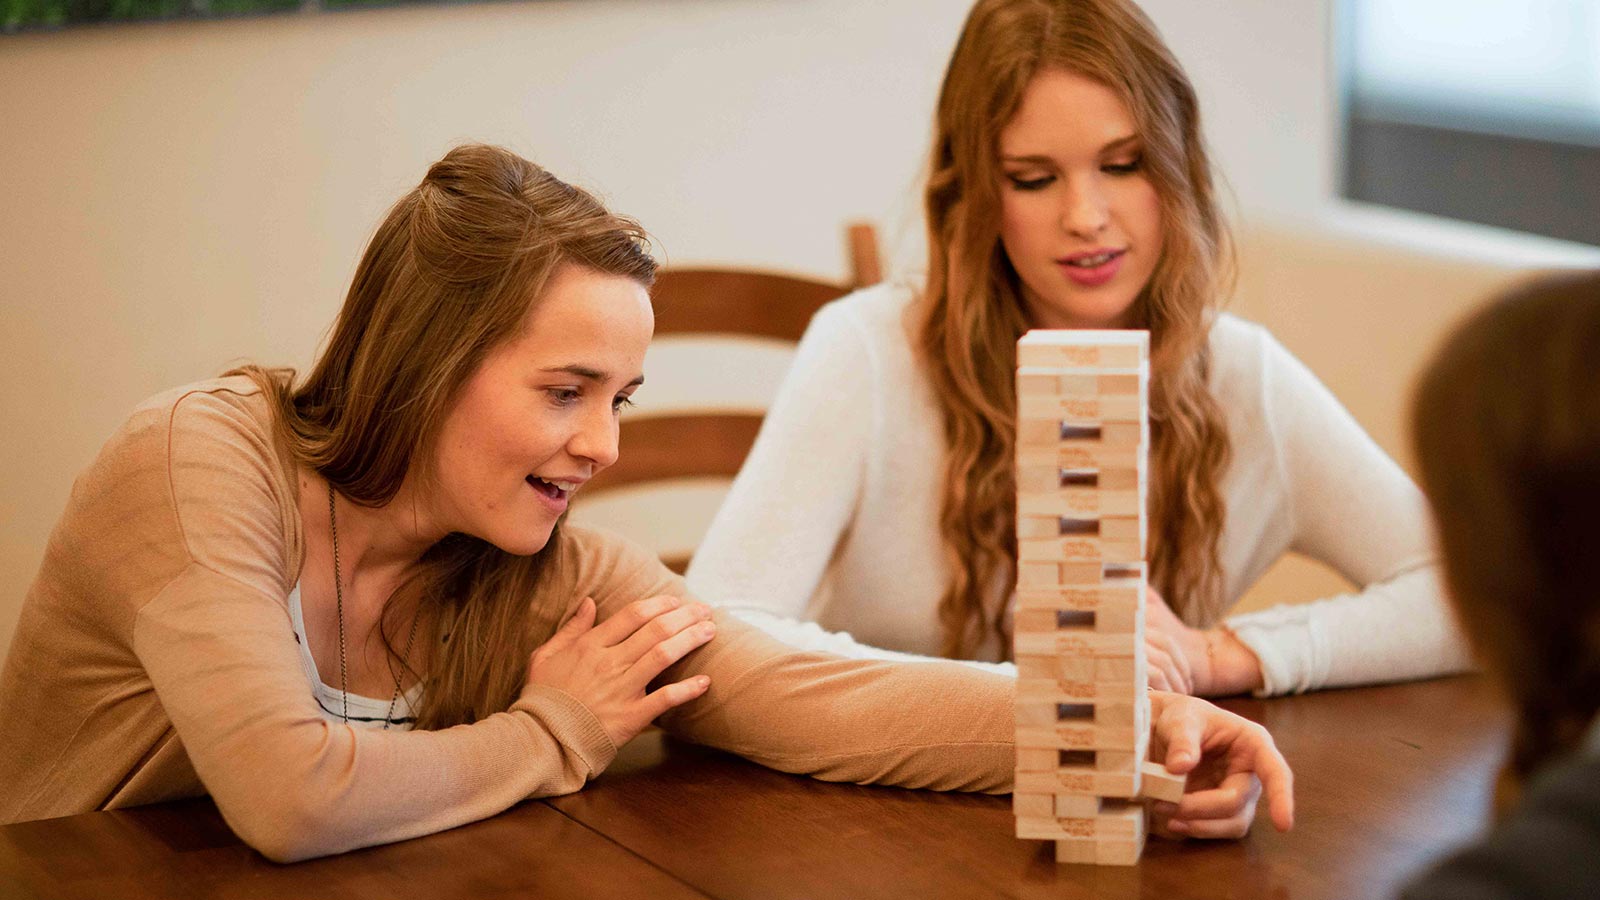 A pair playing a careful game of Jenga on a wooden table.